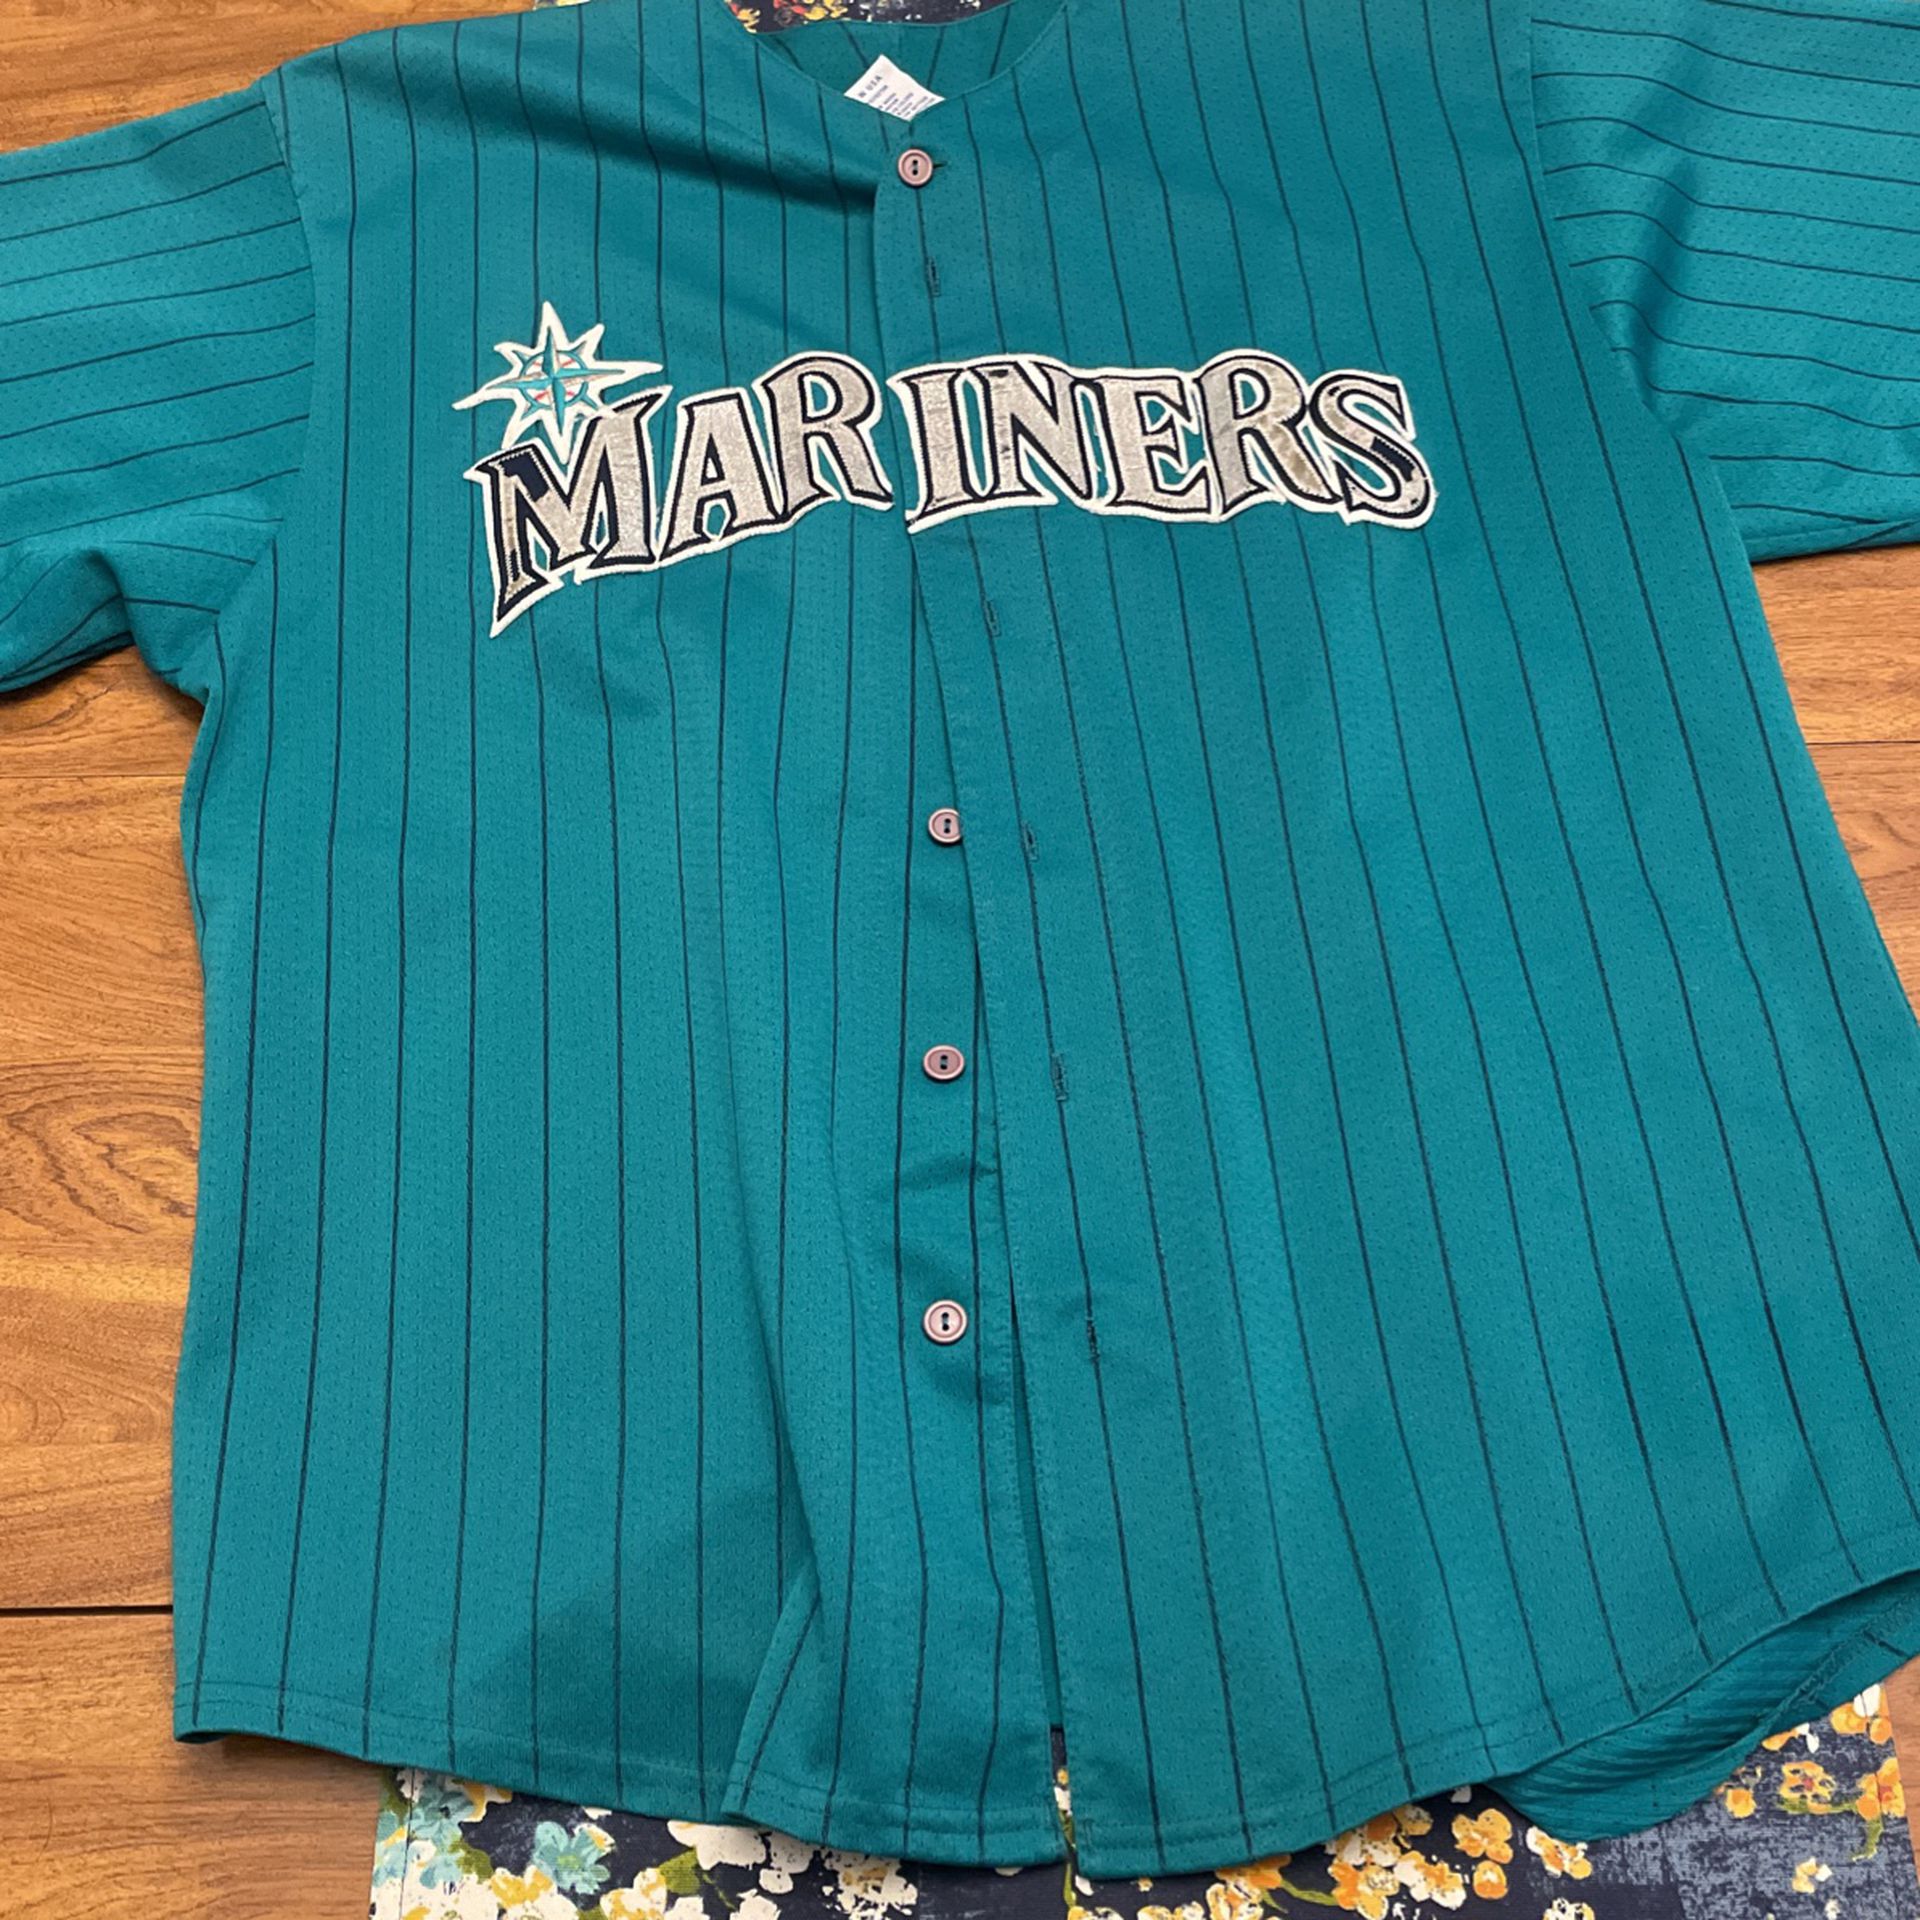 Seattle Mariners Jersey for Sale in Minneapolis, MN - OfferUp